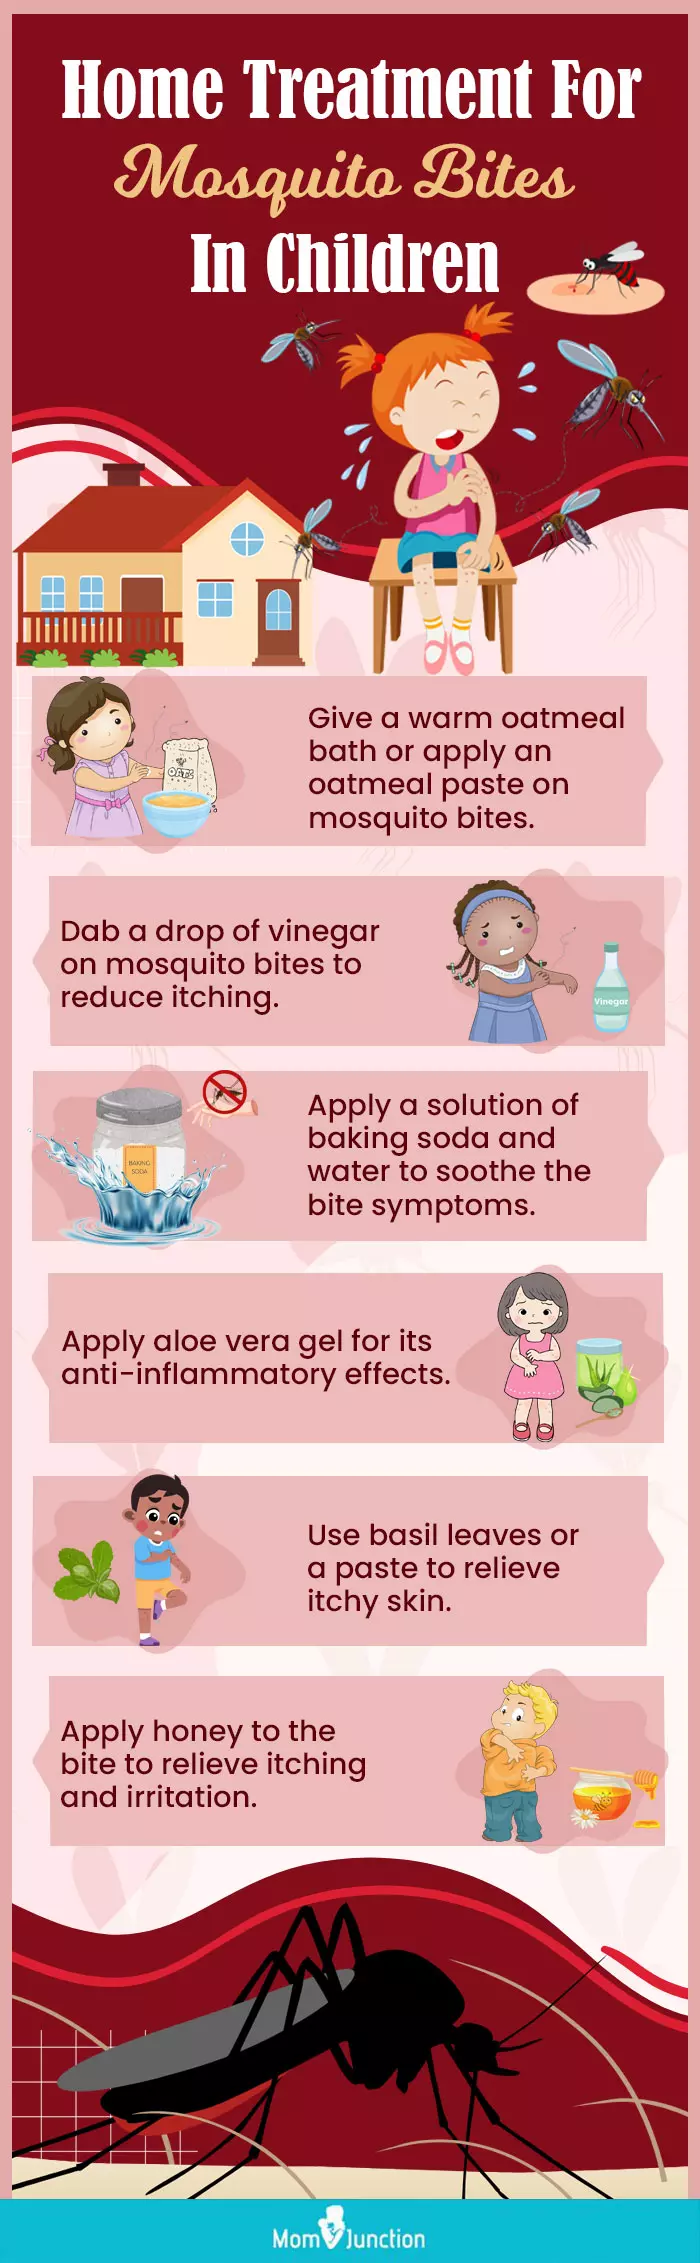 home treatment for mosquito bites in children (infographic)